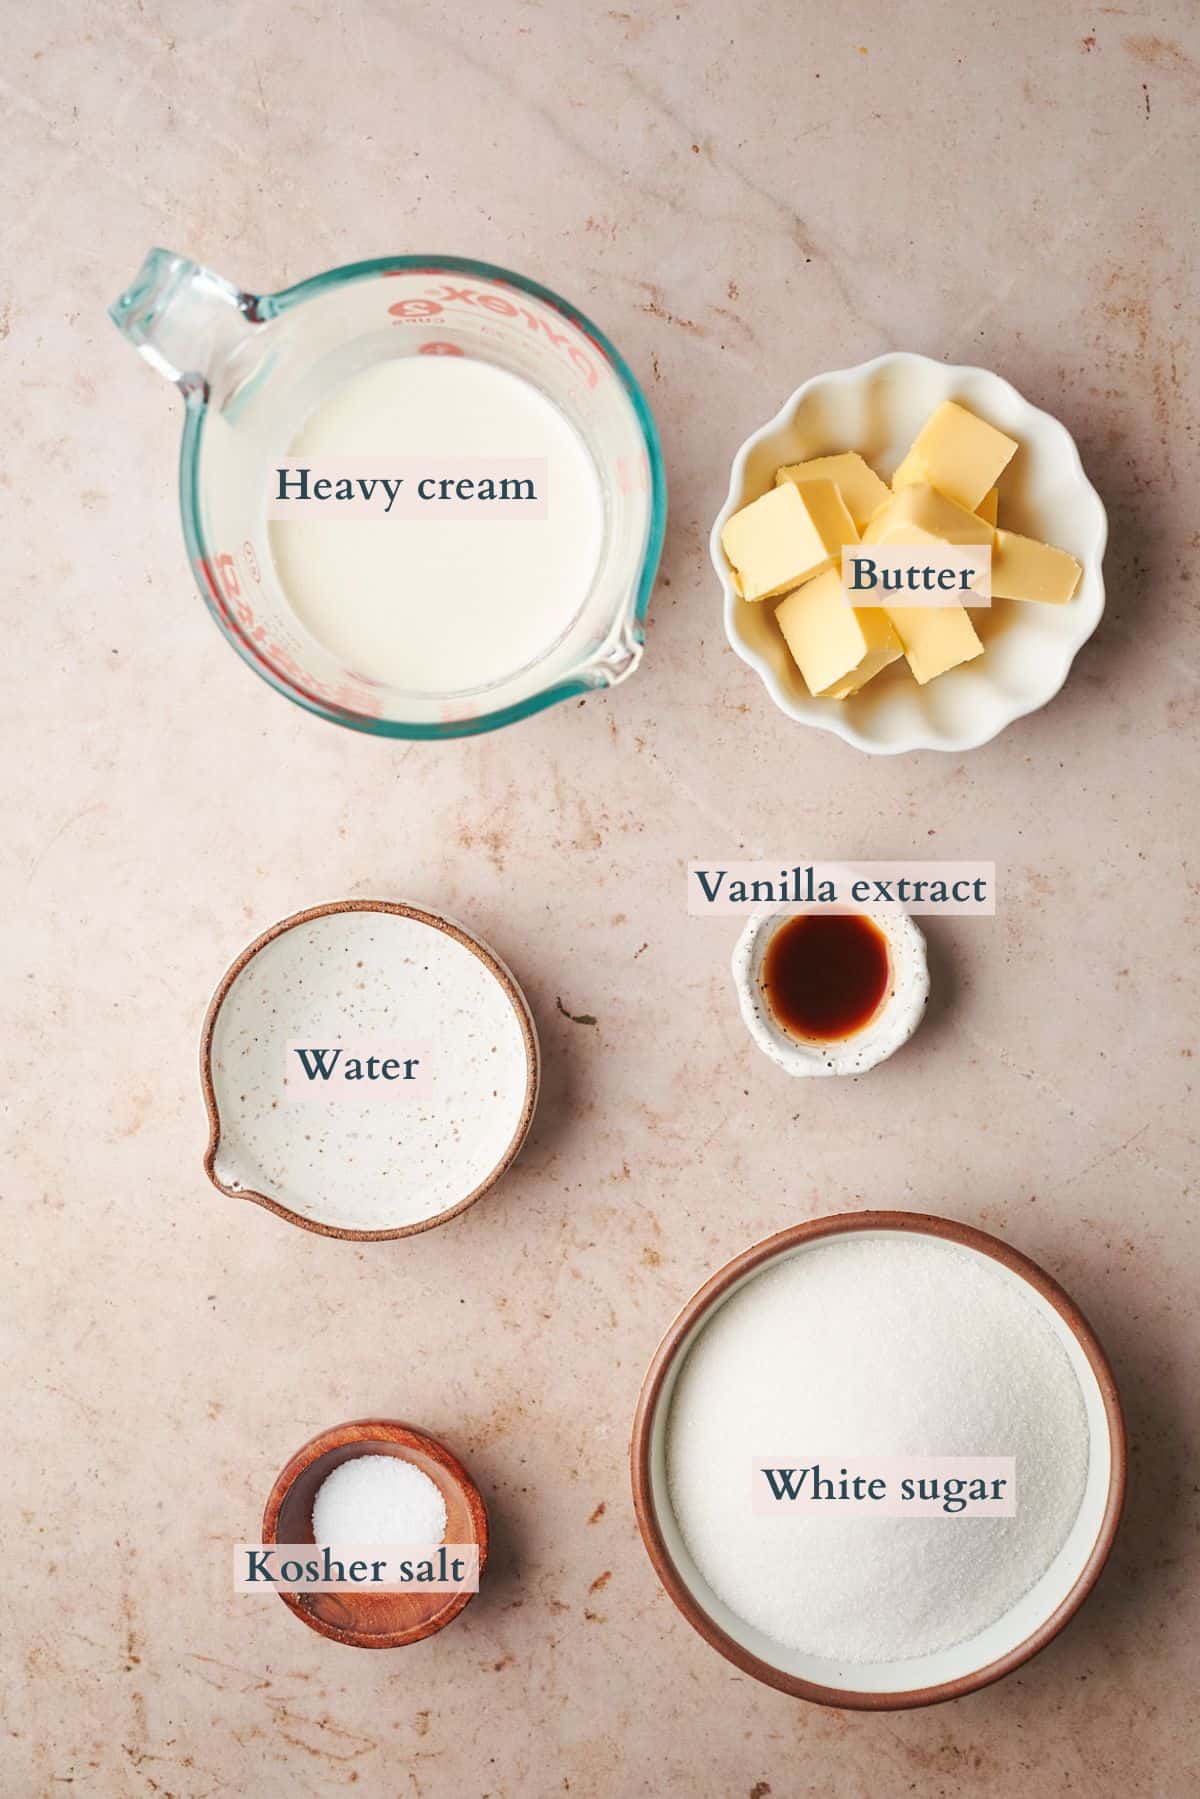 Ingredients to make salted caramel laid out in small bowls on a table labeled to denote each ingredient.